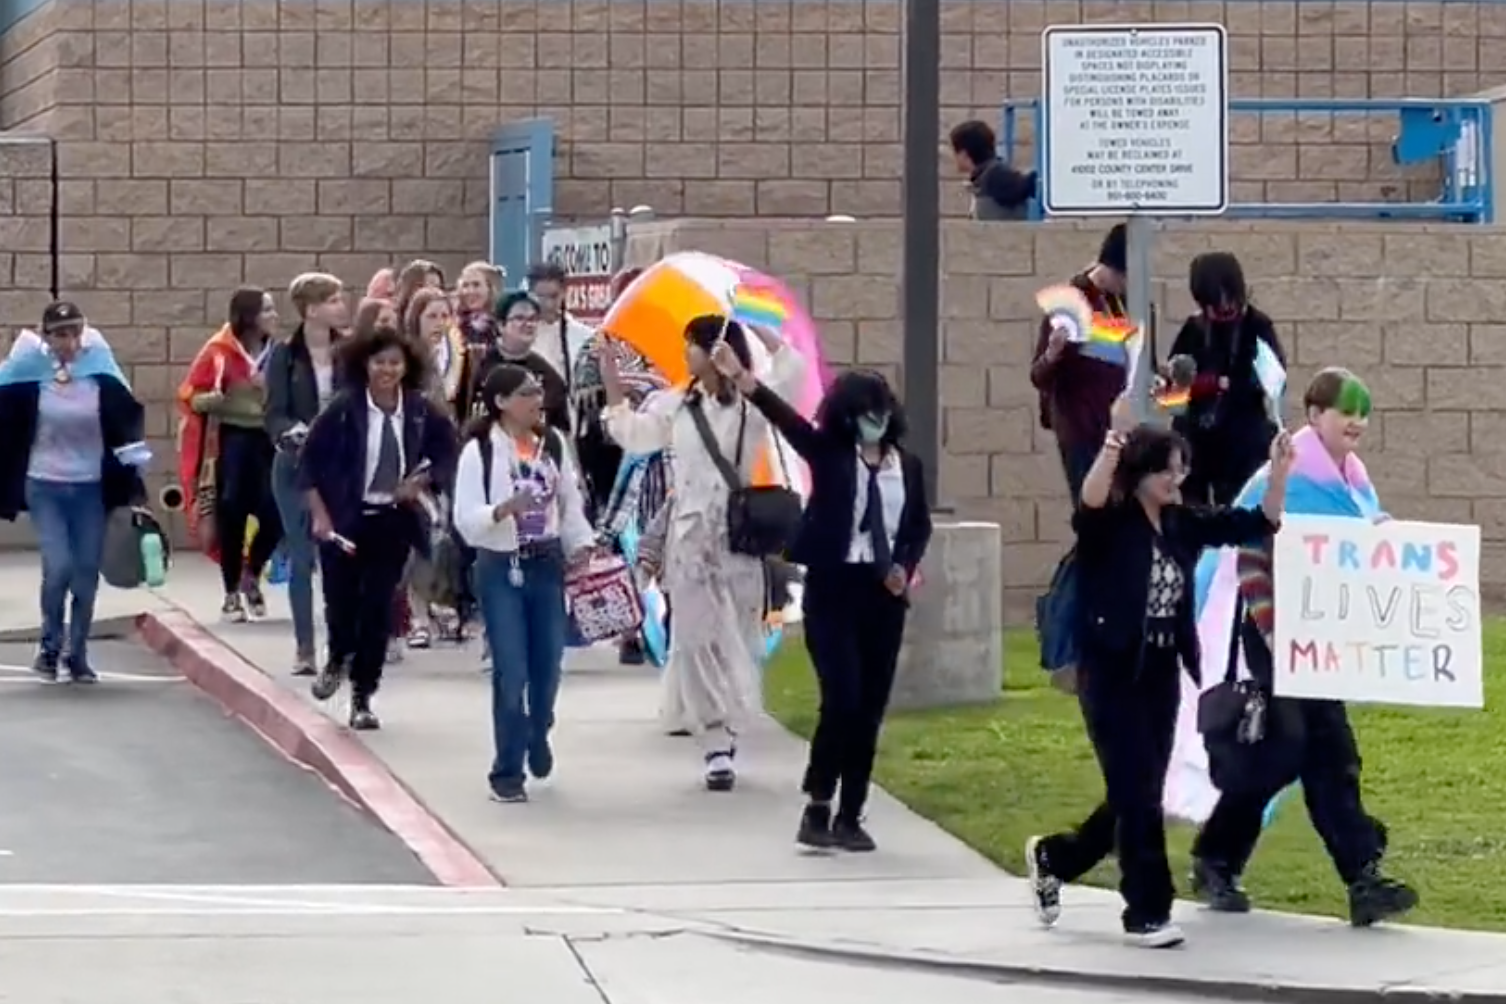 Students stage a walkout at Great Oaks High School in Temecula